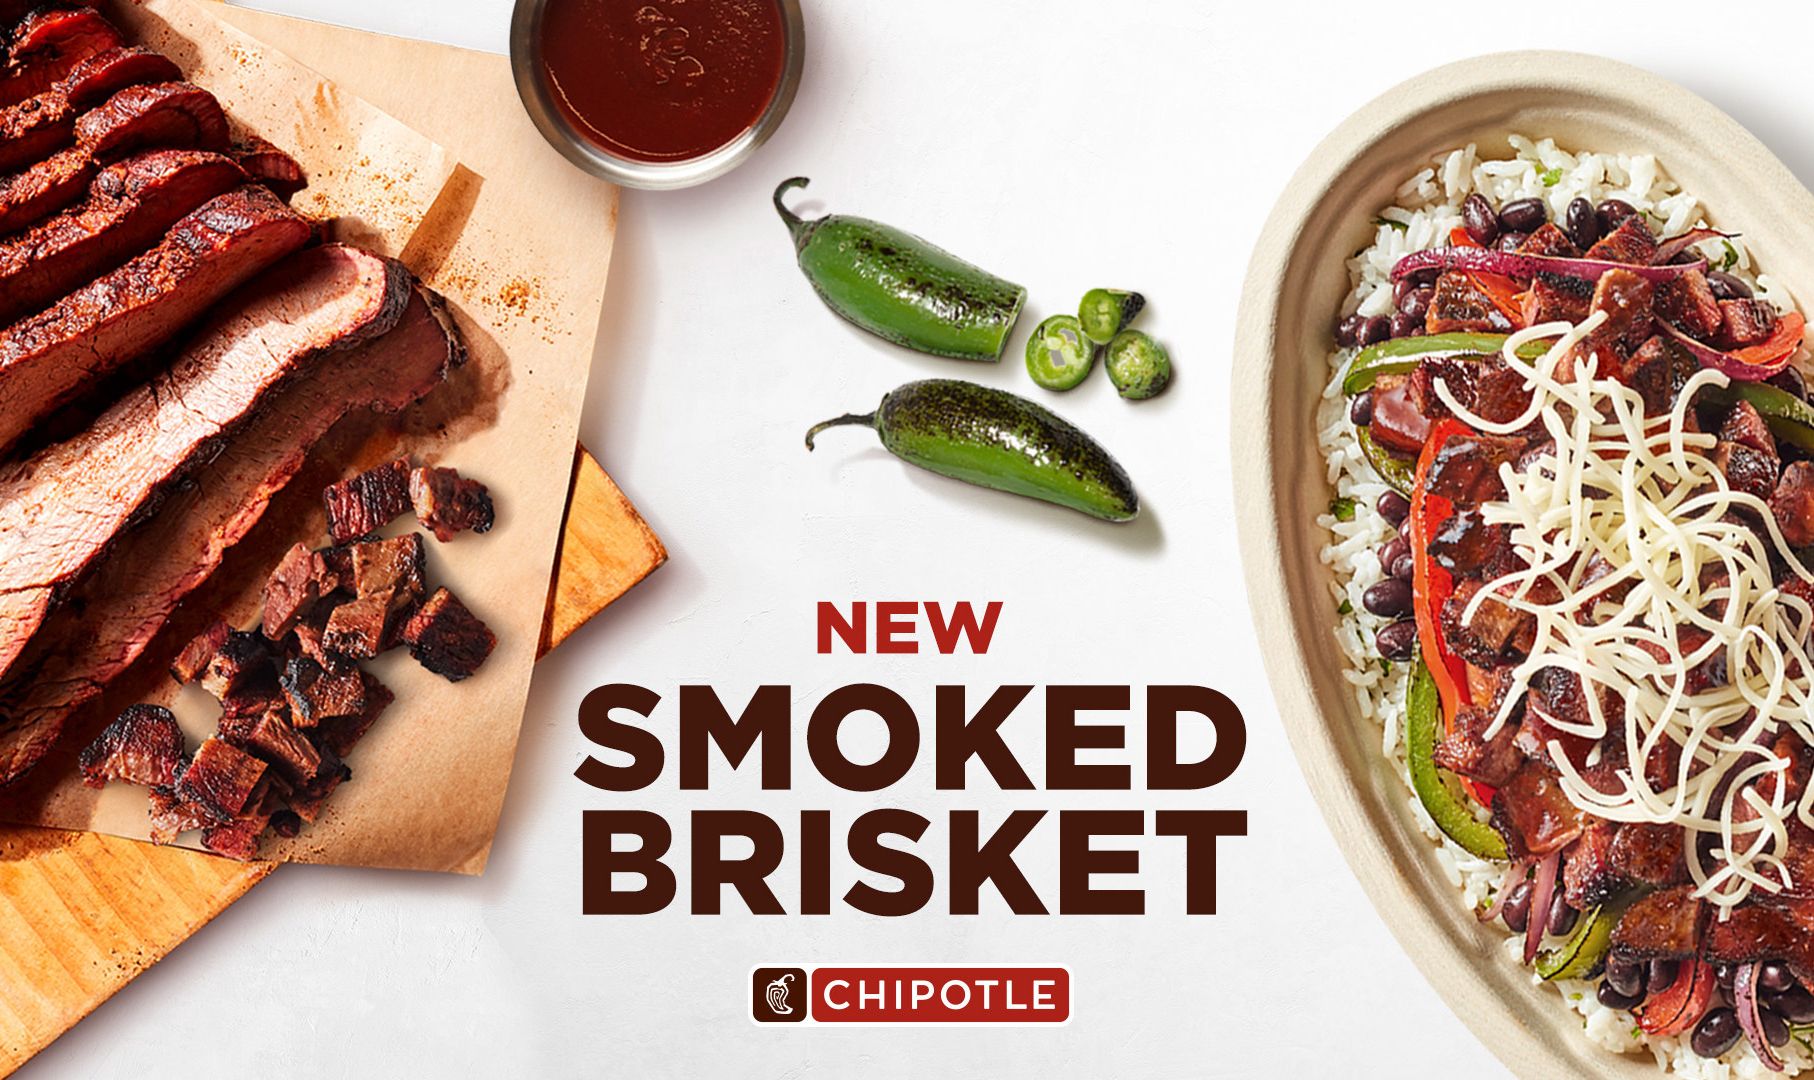 Select Chipotle Restaurants will be Testing Out a New Smoked Beef Brisket for a Limited Time